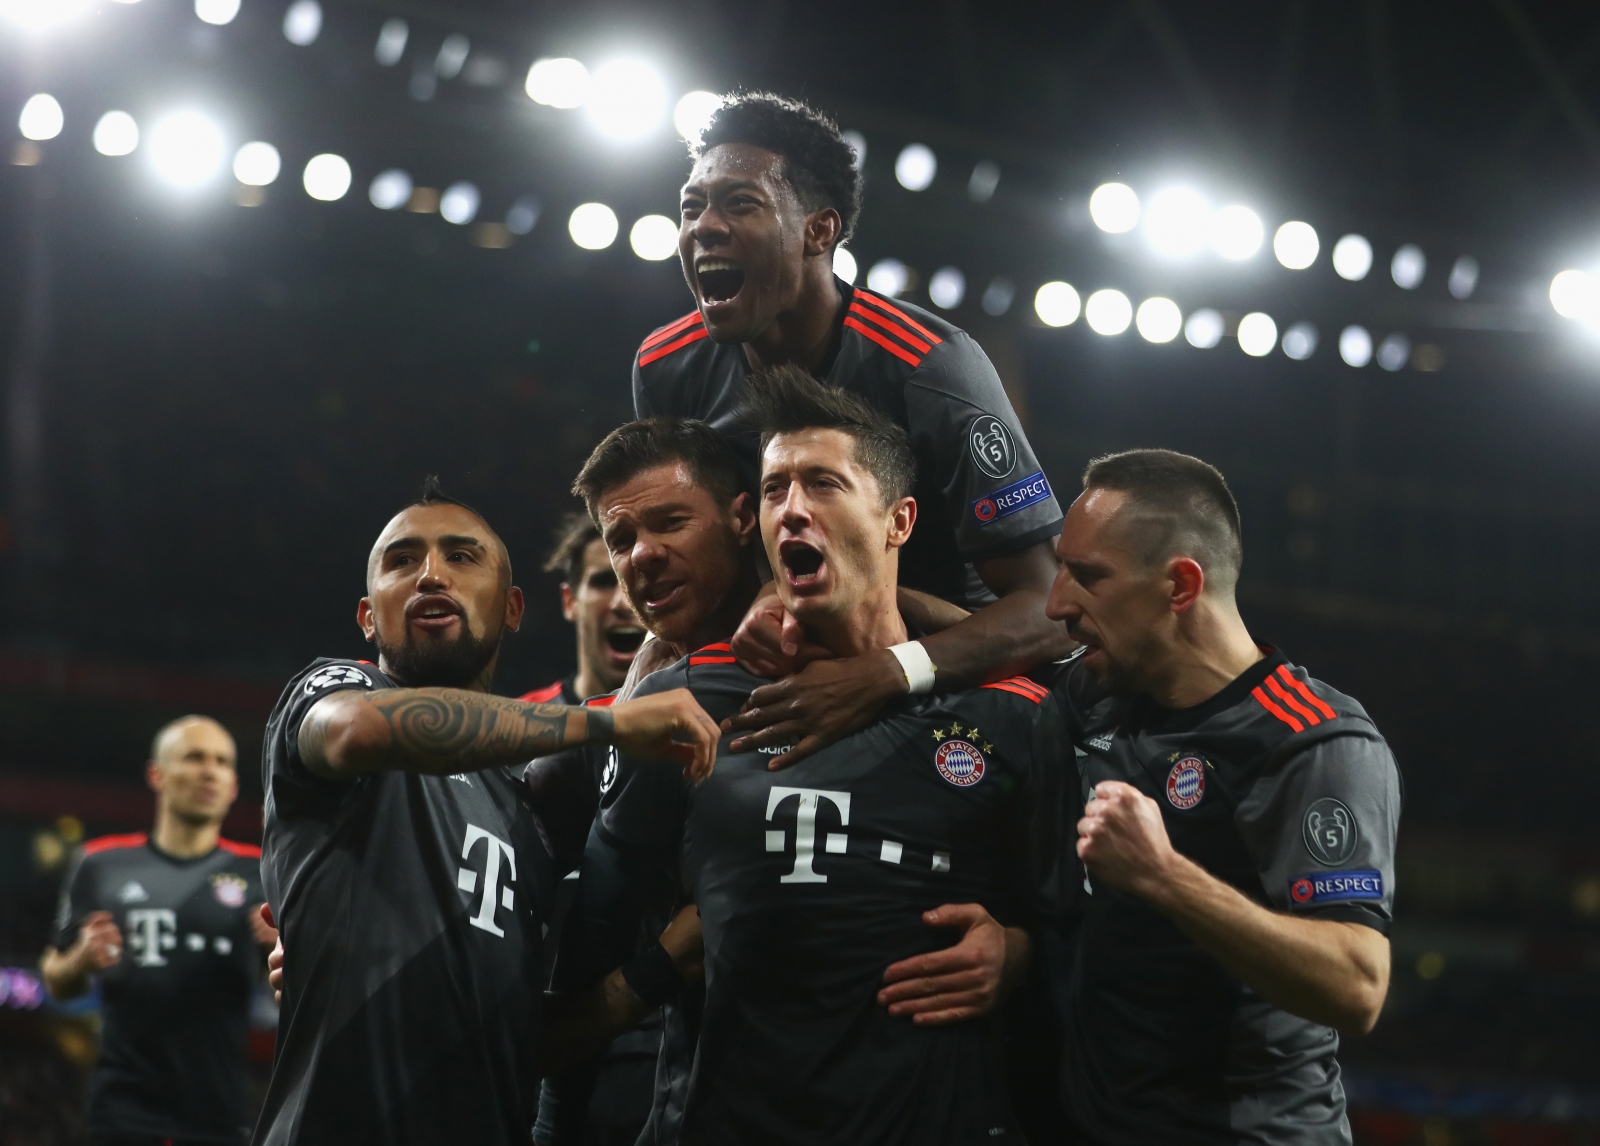 Bayern Munich vs Real Madrid, Champions League quarter-final 2016/17: How to watch ...